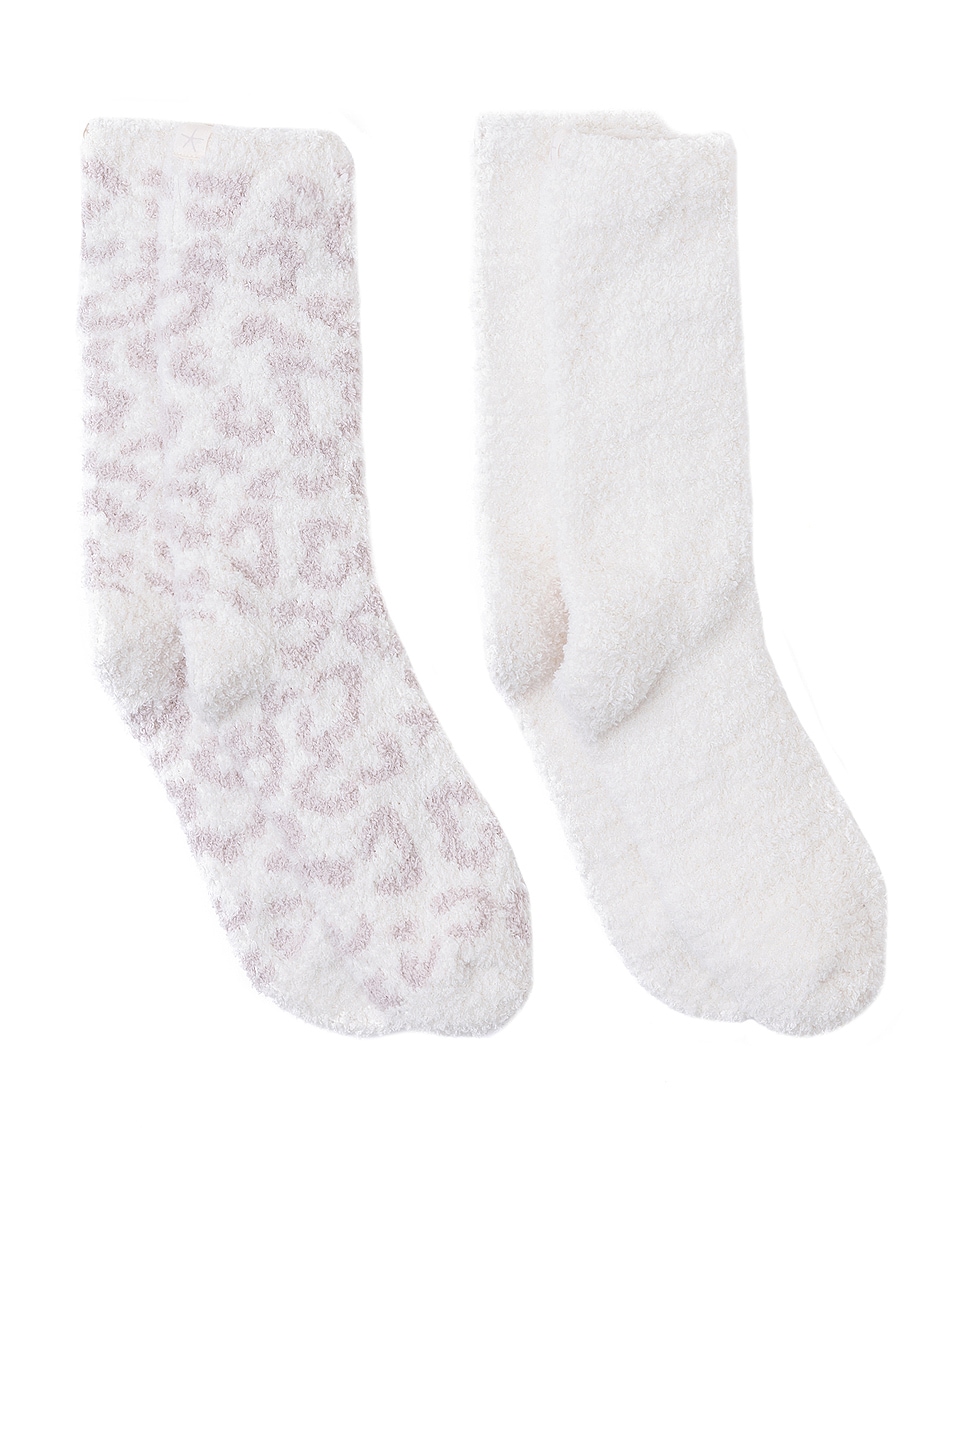 Barefoot Dreams CozyChic Socks in Oyster & White